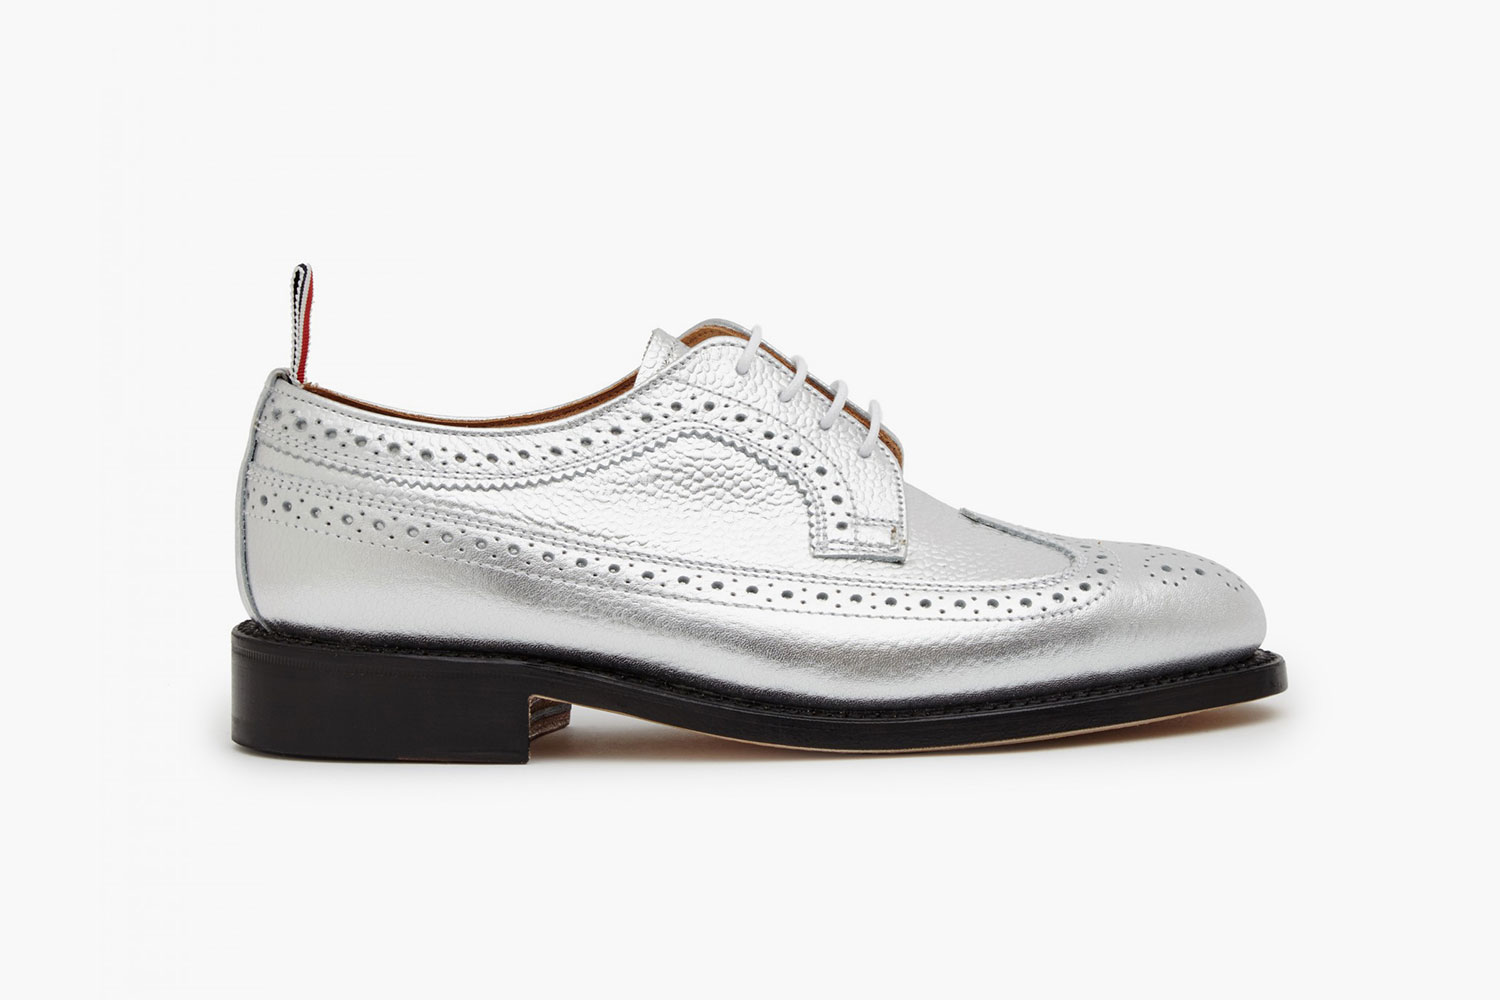 Thom Browne Special Collection for Dover Street Market